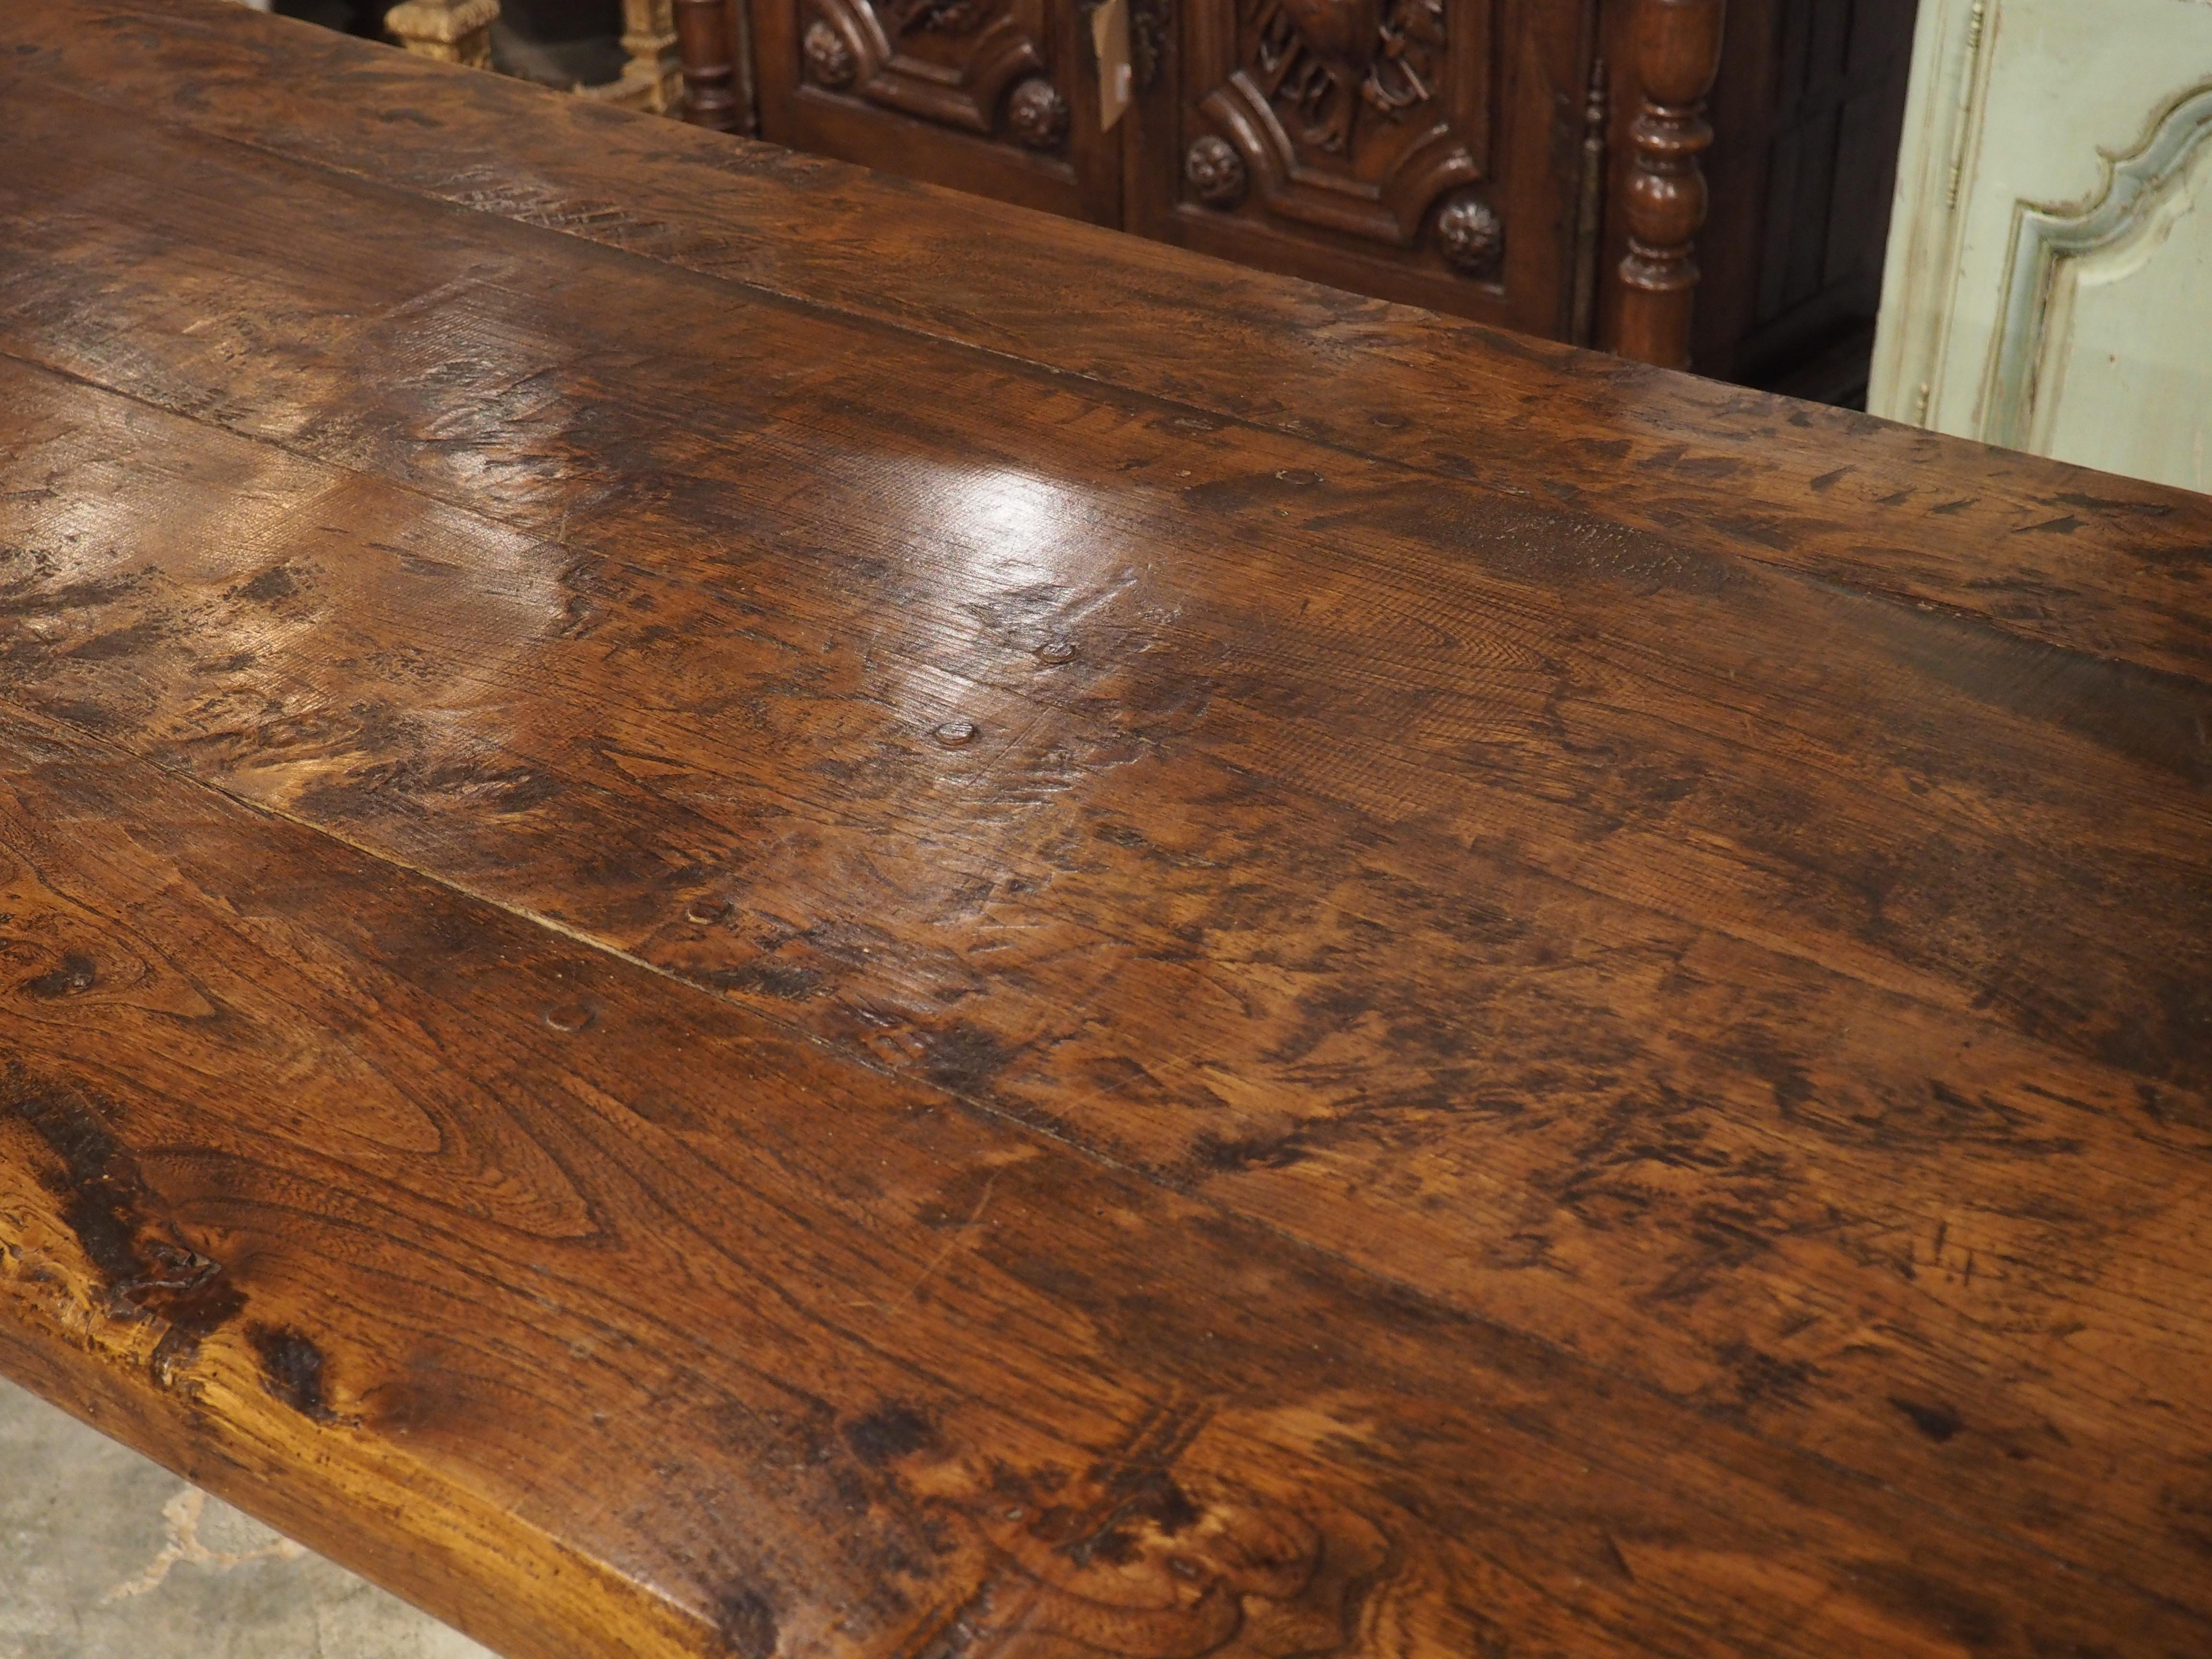 French Antique Chestnut Dining Table from a Chateau, Coat Nizan, Brittany